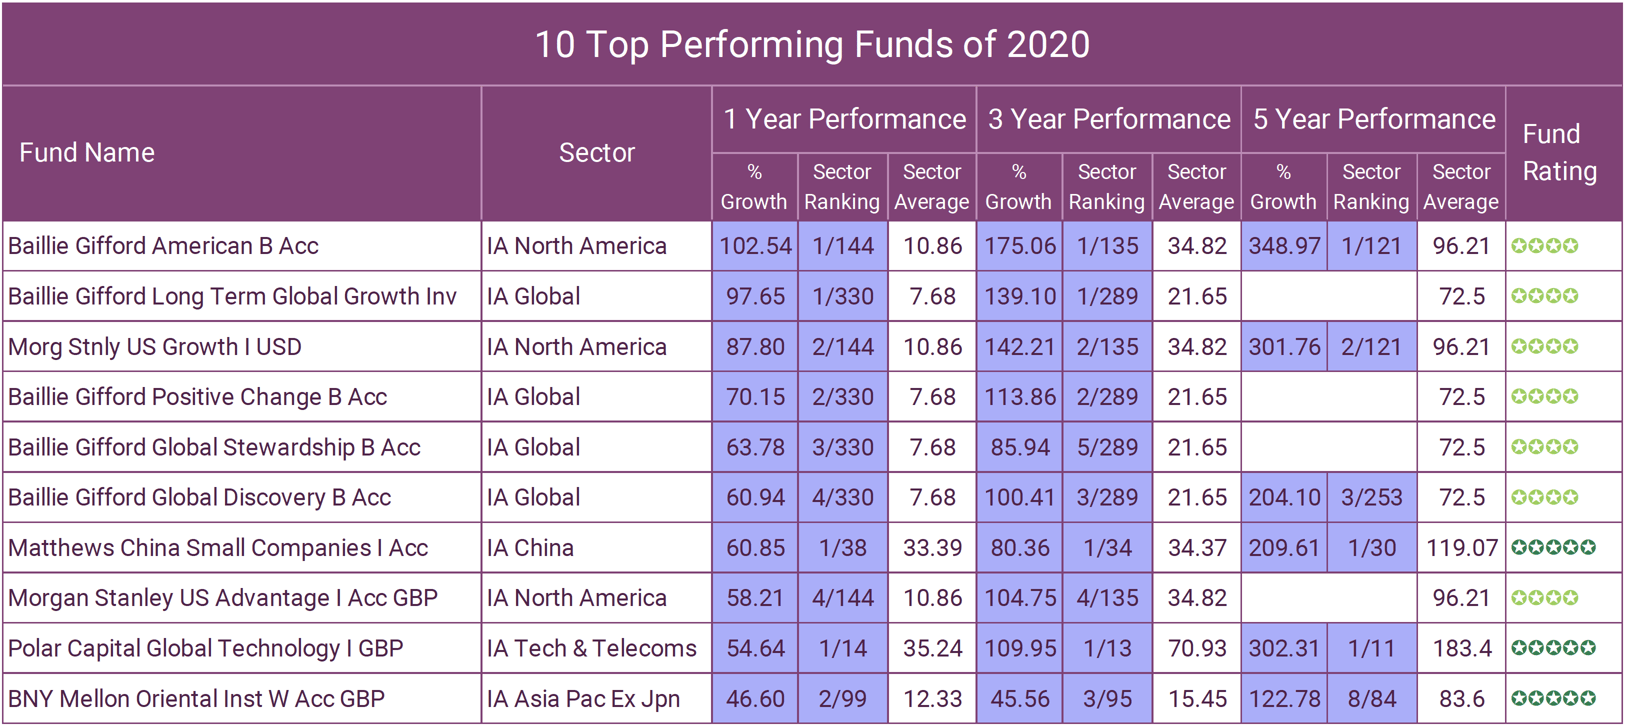 The Best Performing Funds of 2020